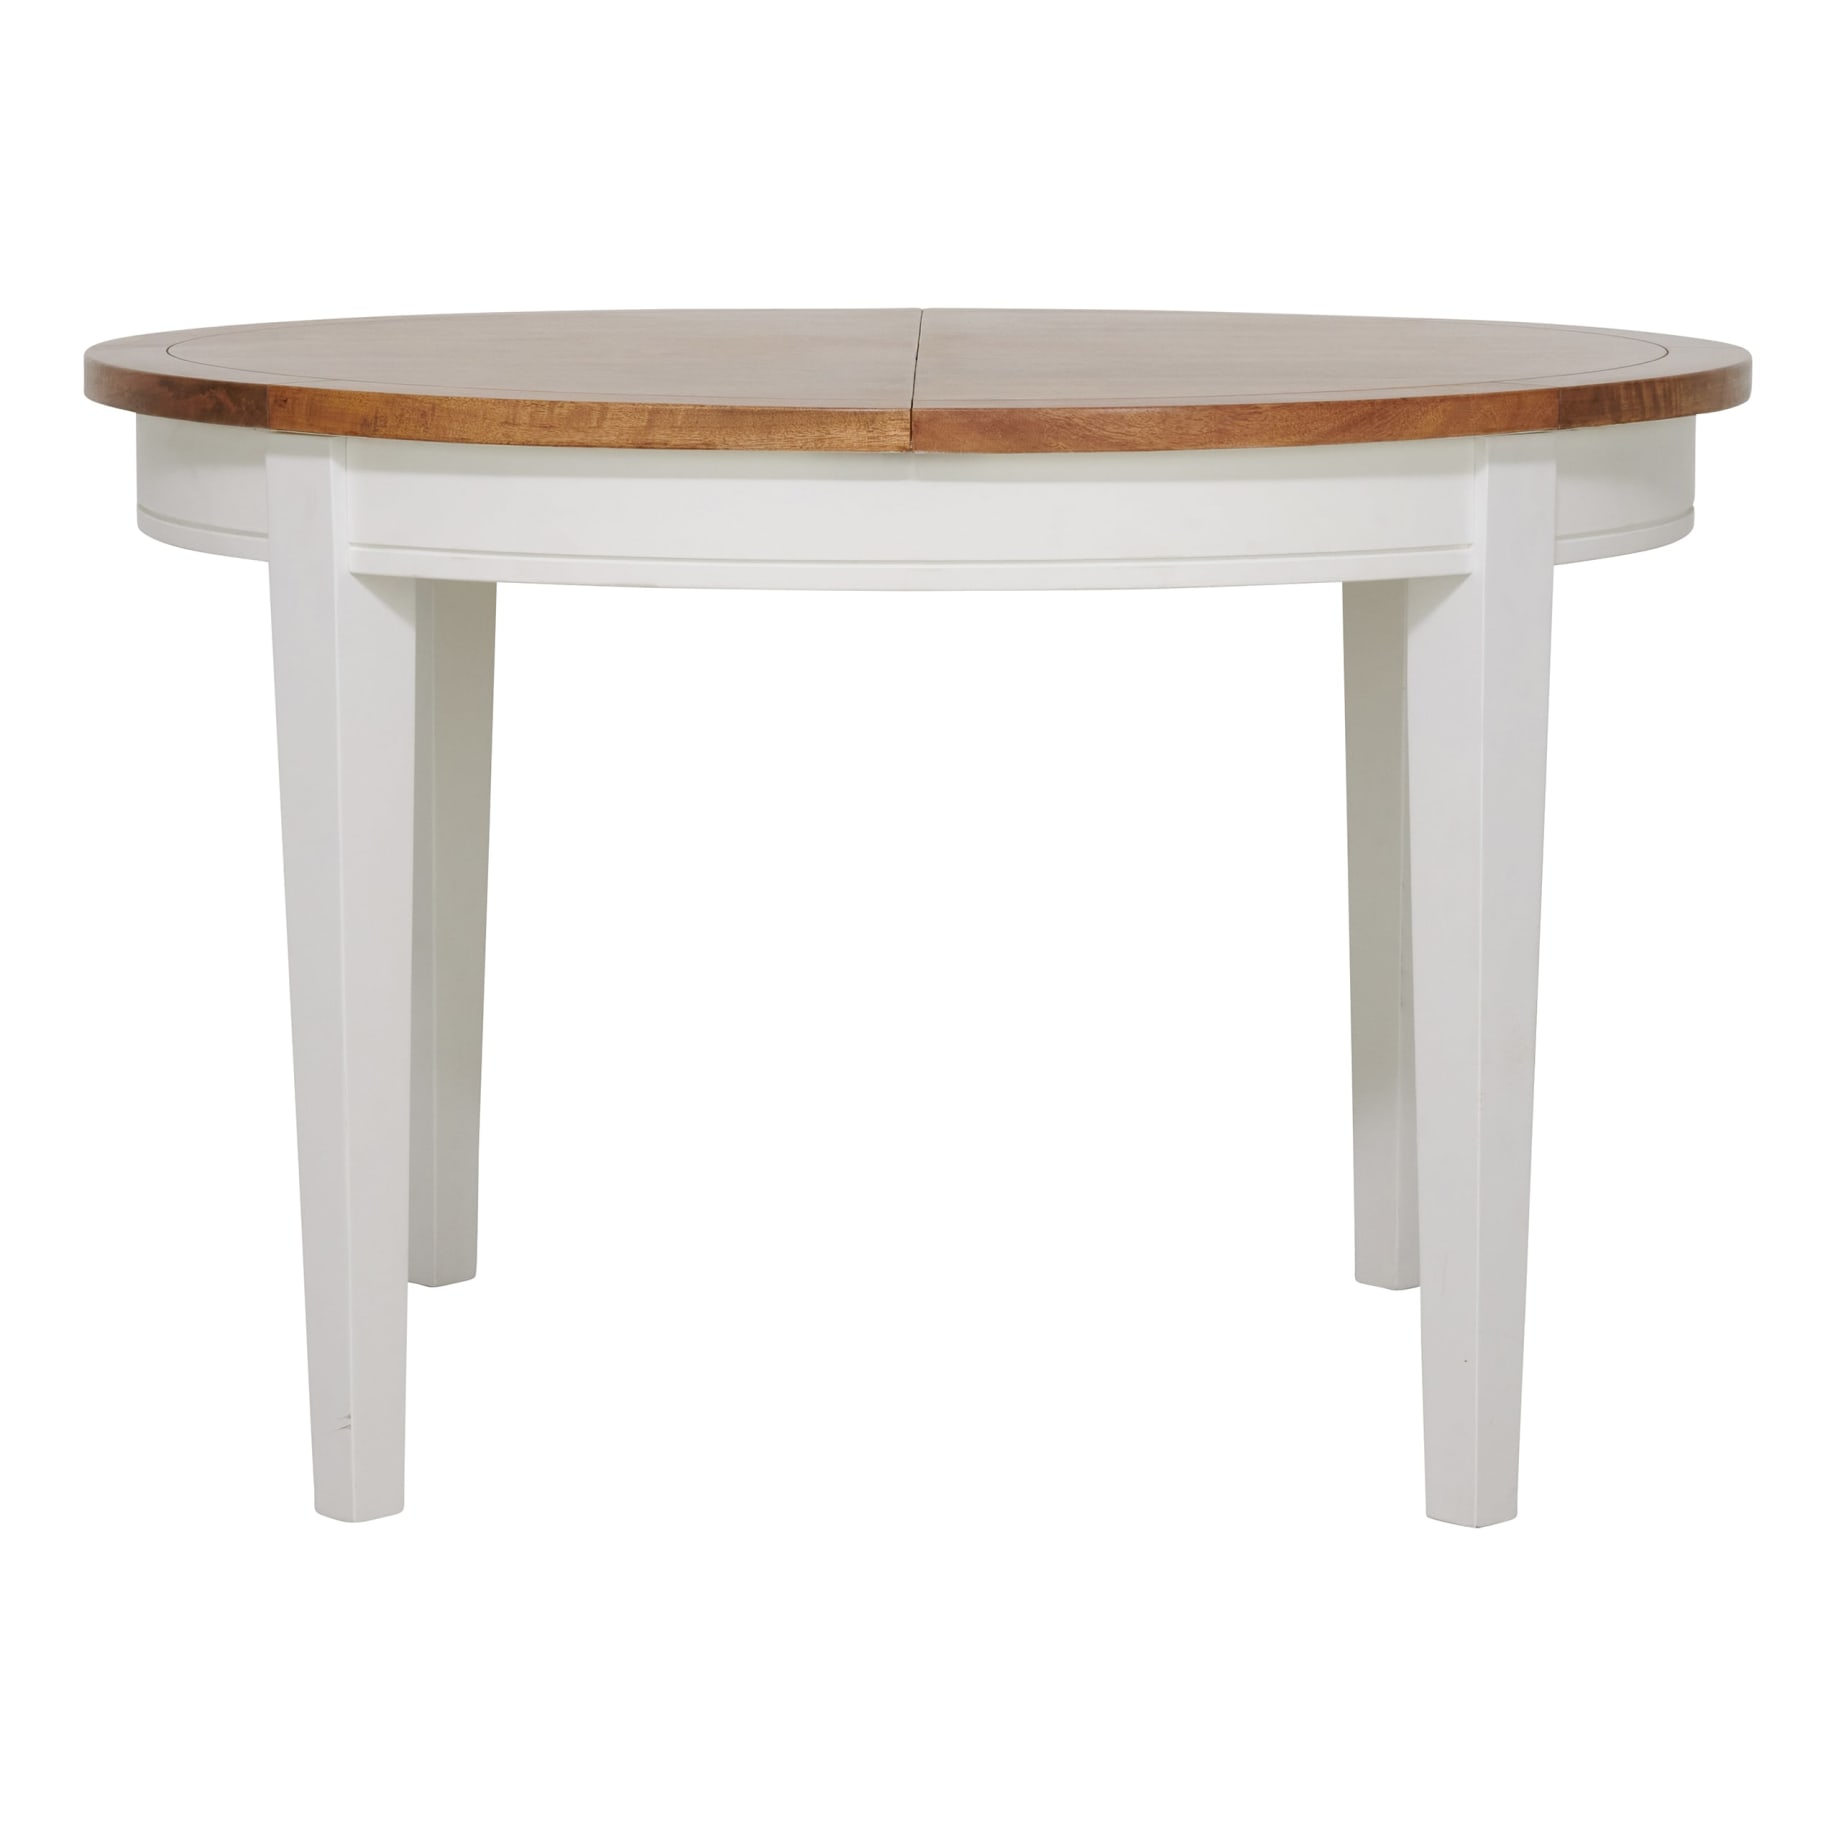 Mango Creek Round Extension Dining Table 120-170cm in White / Clear Lacquer